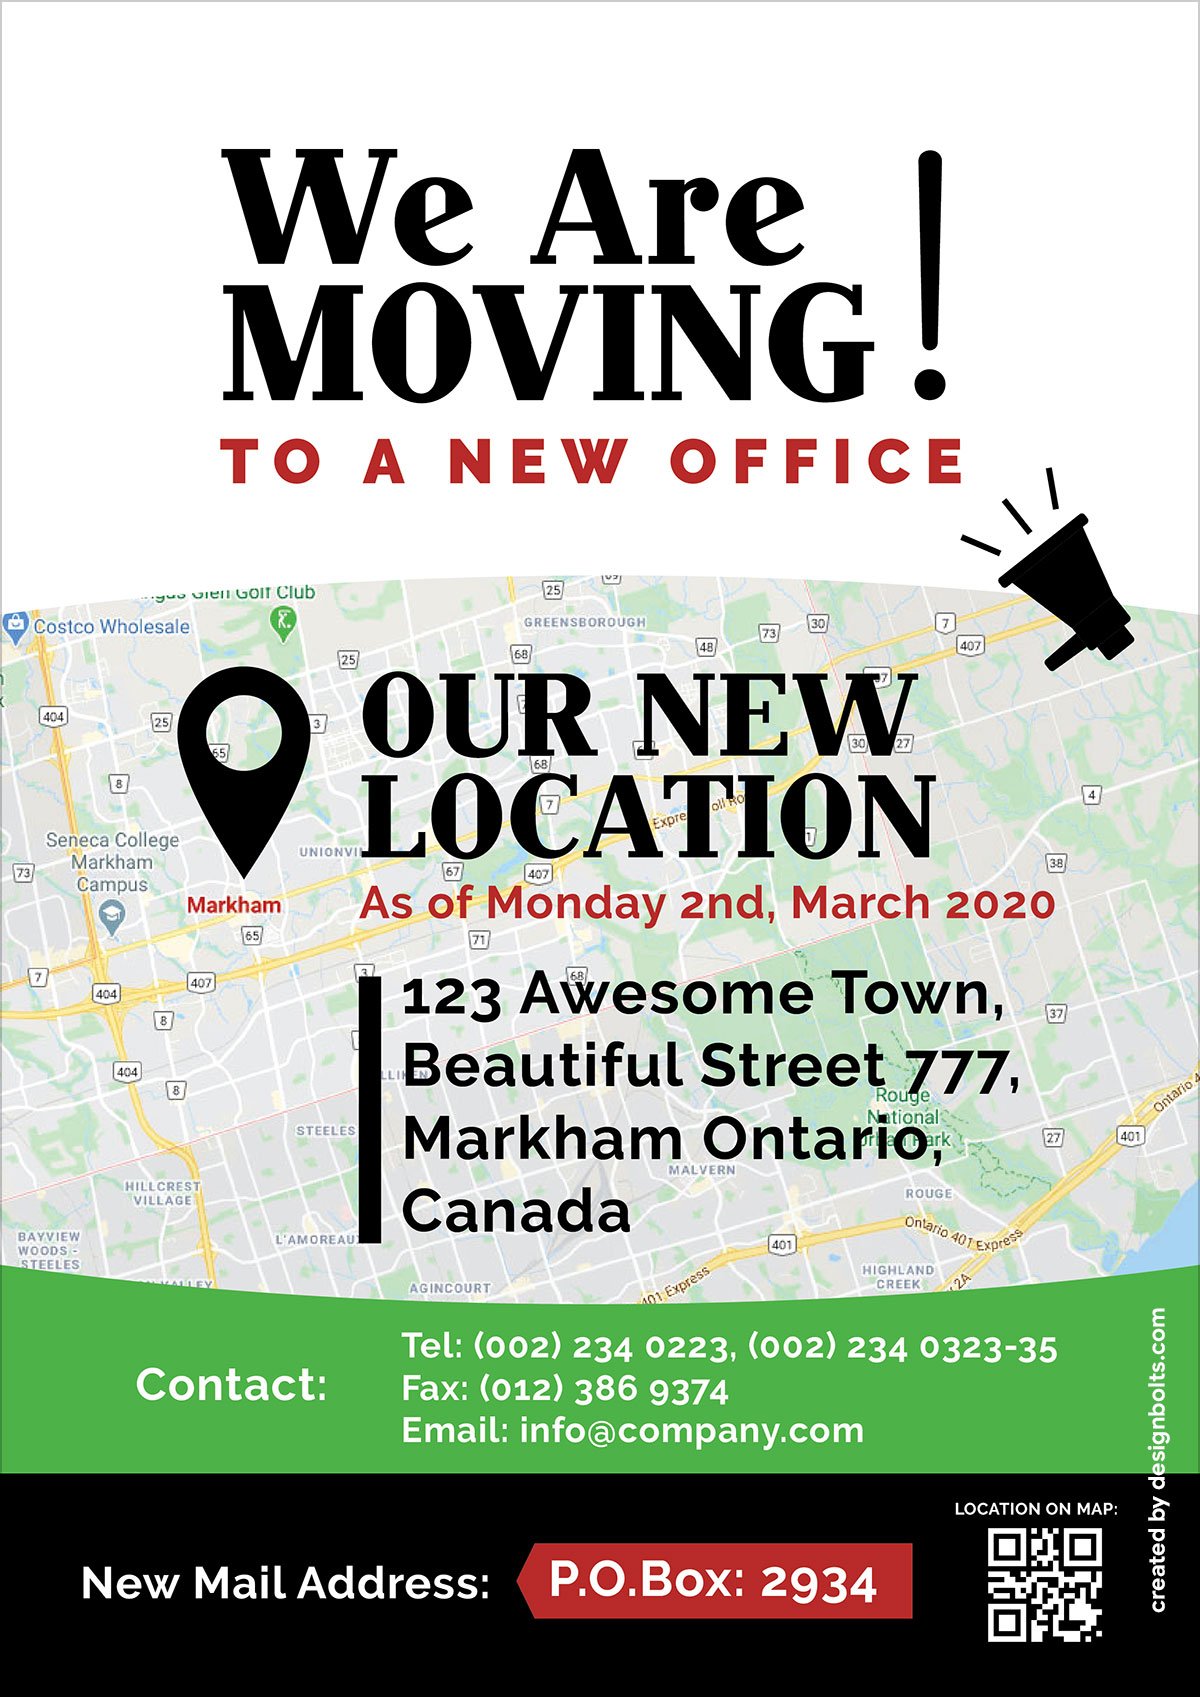 Free Office Moving Announcement Flyer Design Template Ai - Designbolts Intended For Moving Flyer Template